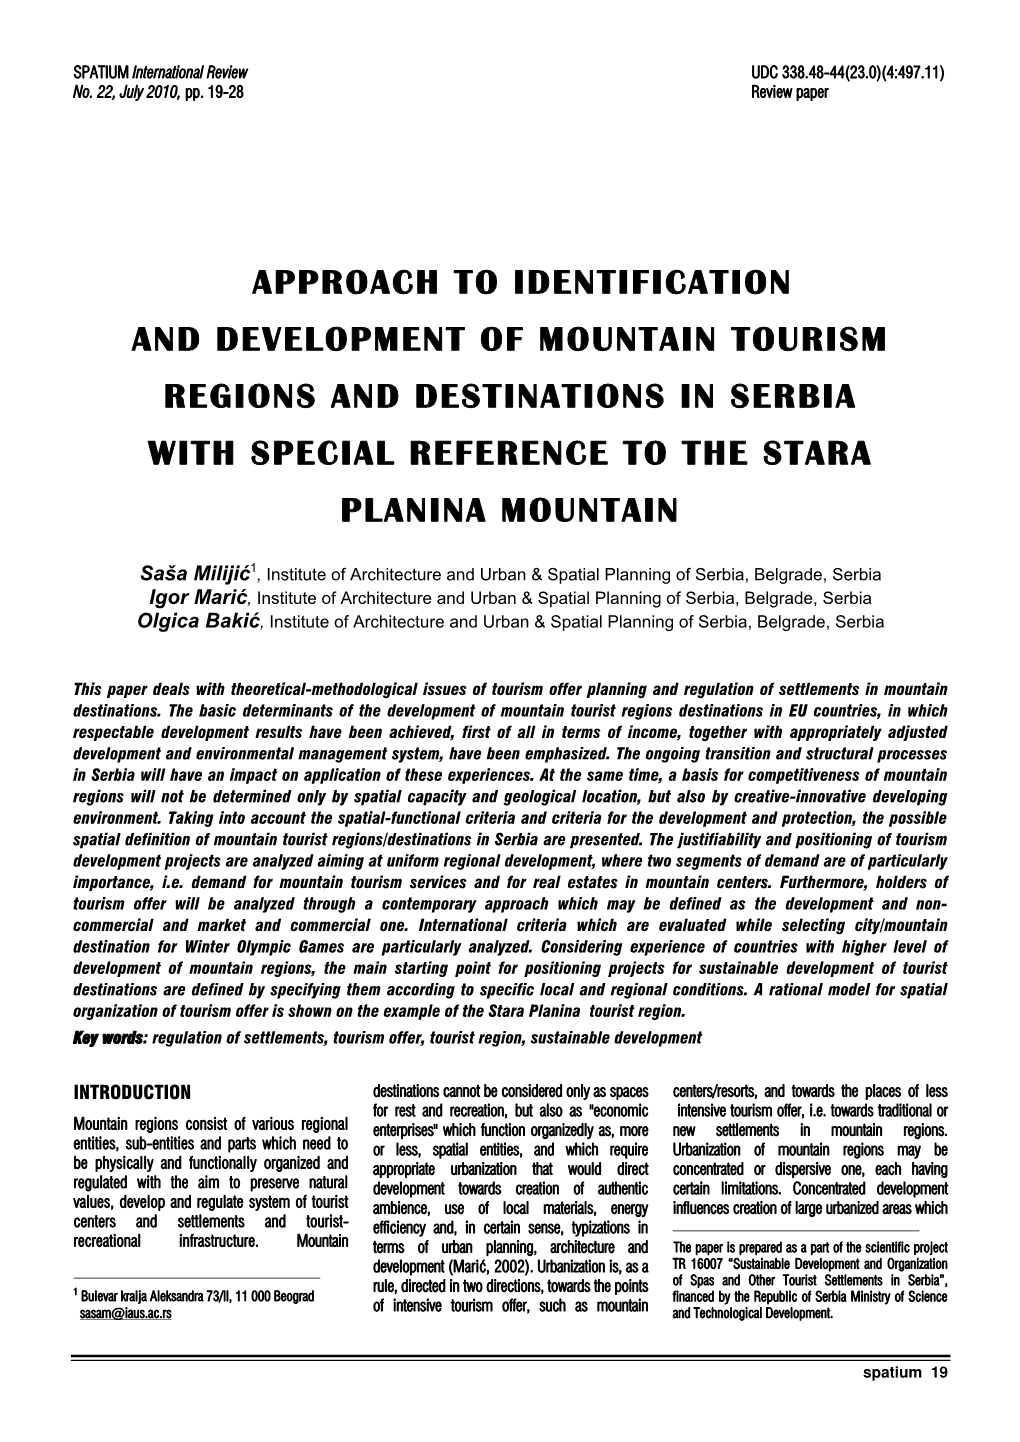 Approach to Identification and Development of Mountain Tourism Regions and Destinations in Serbia with Special Reference to the Stara Planina Mountain